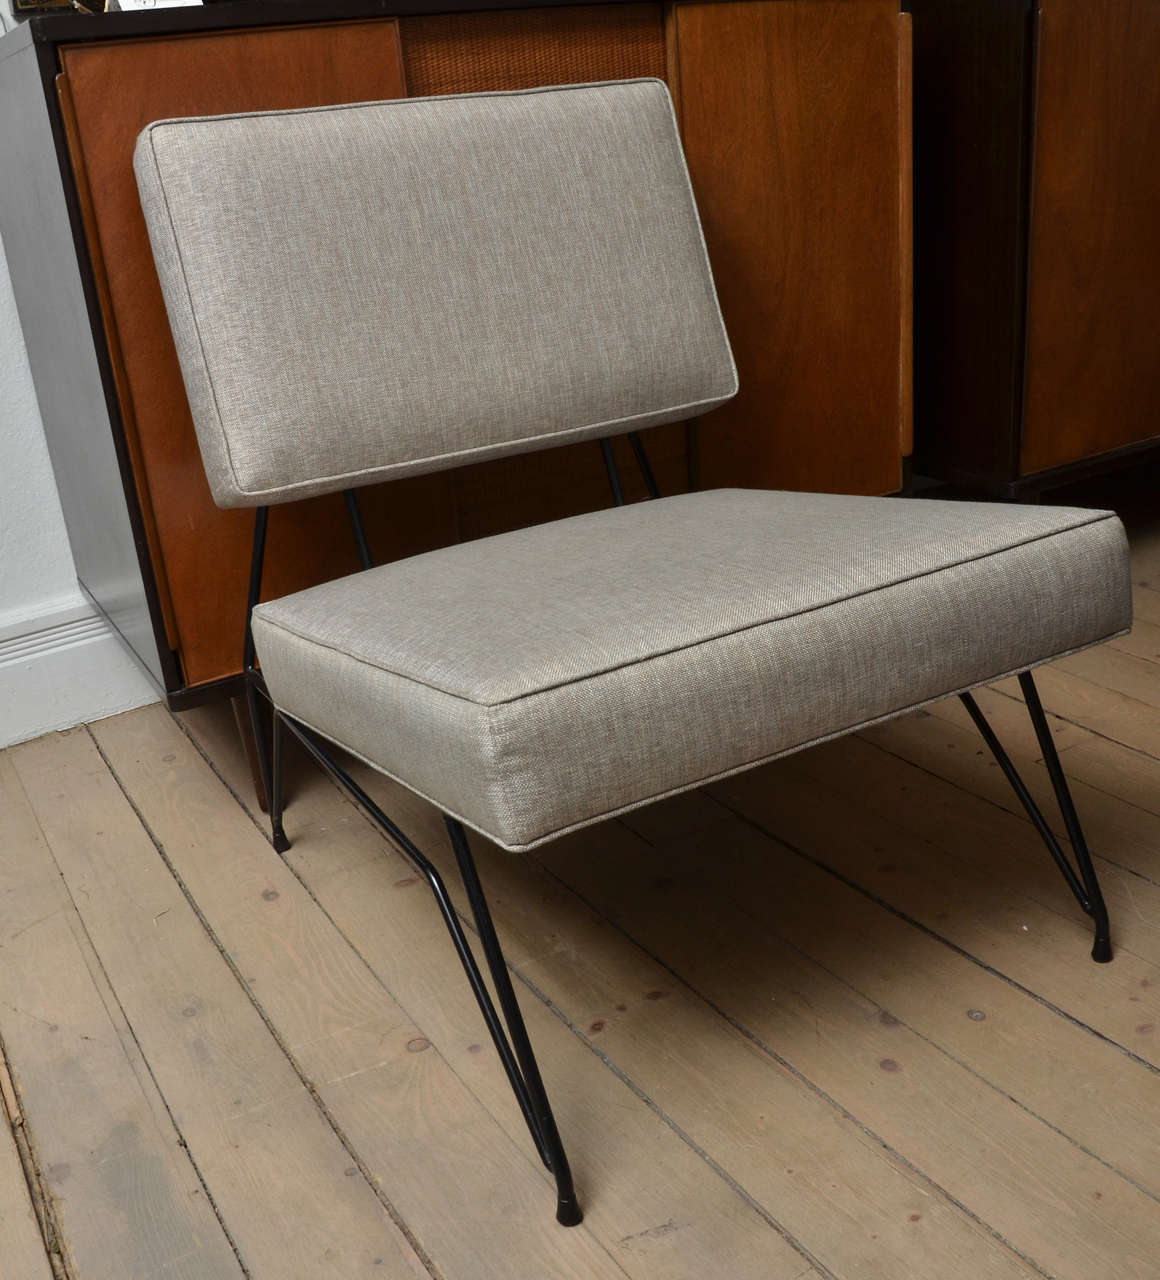 Stylish Italian design highlight this pair of iron base linen upholstered modernist chairs.